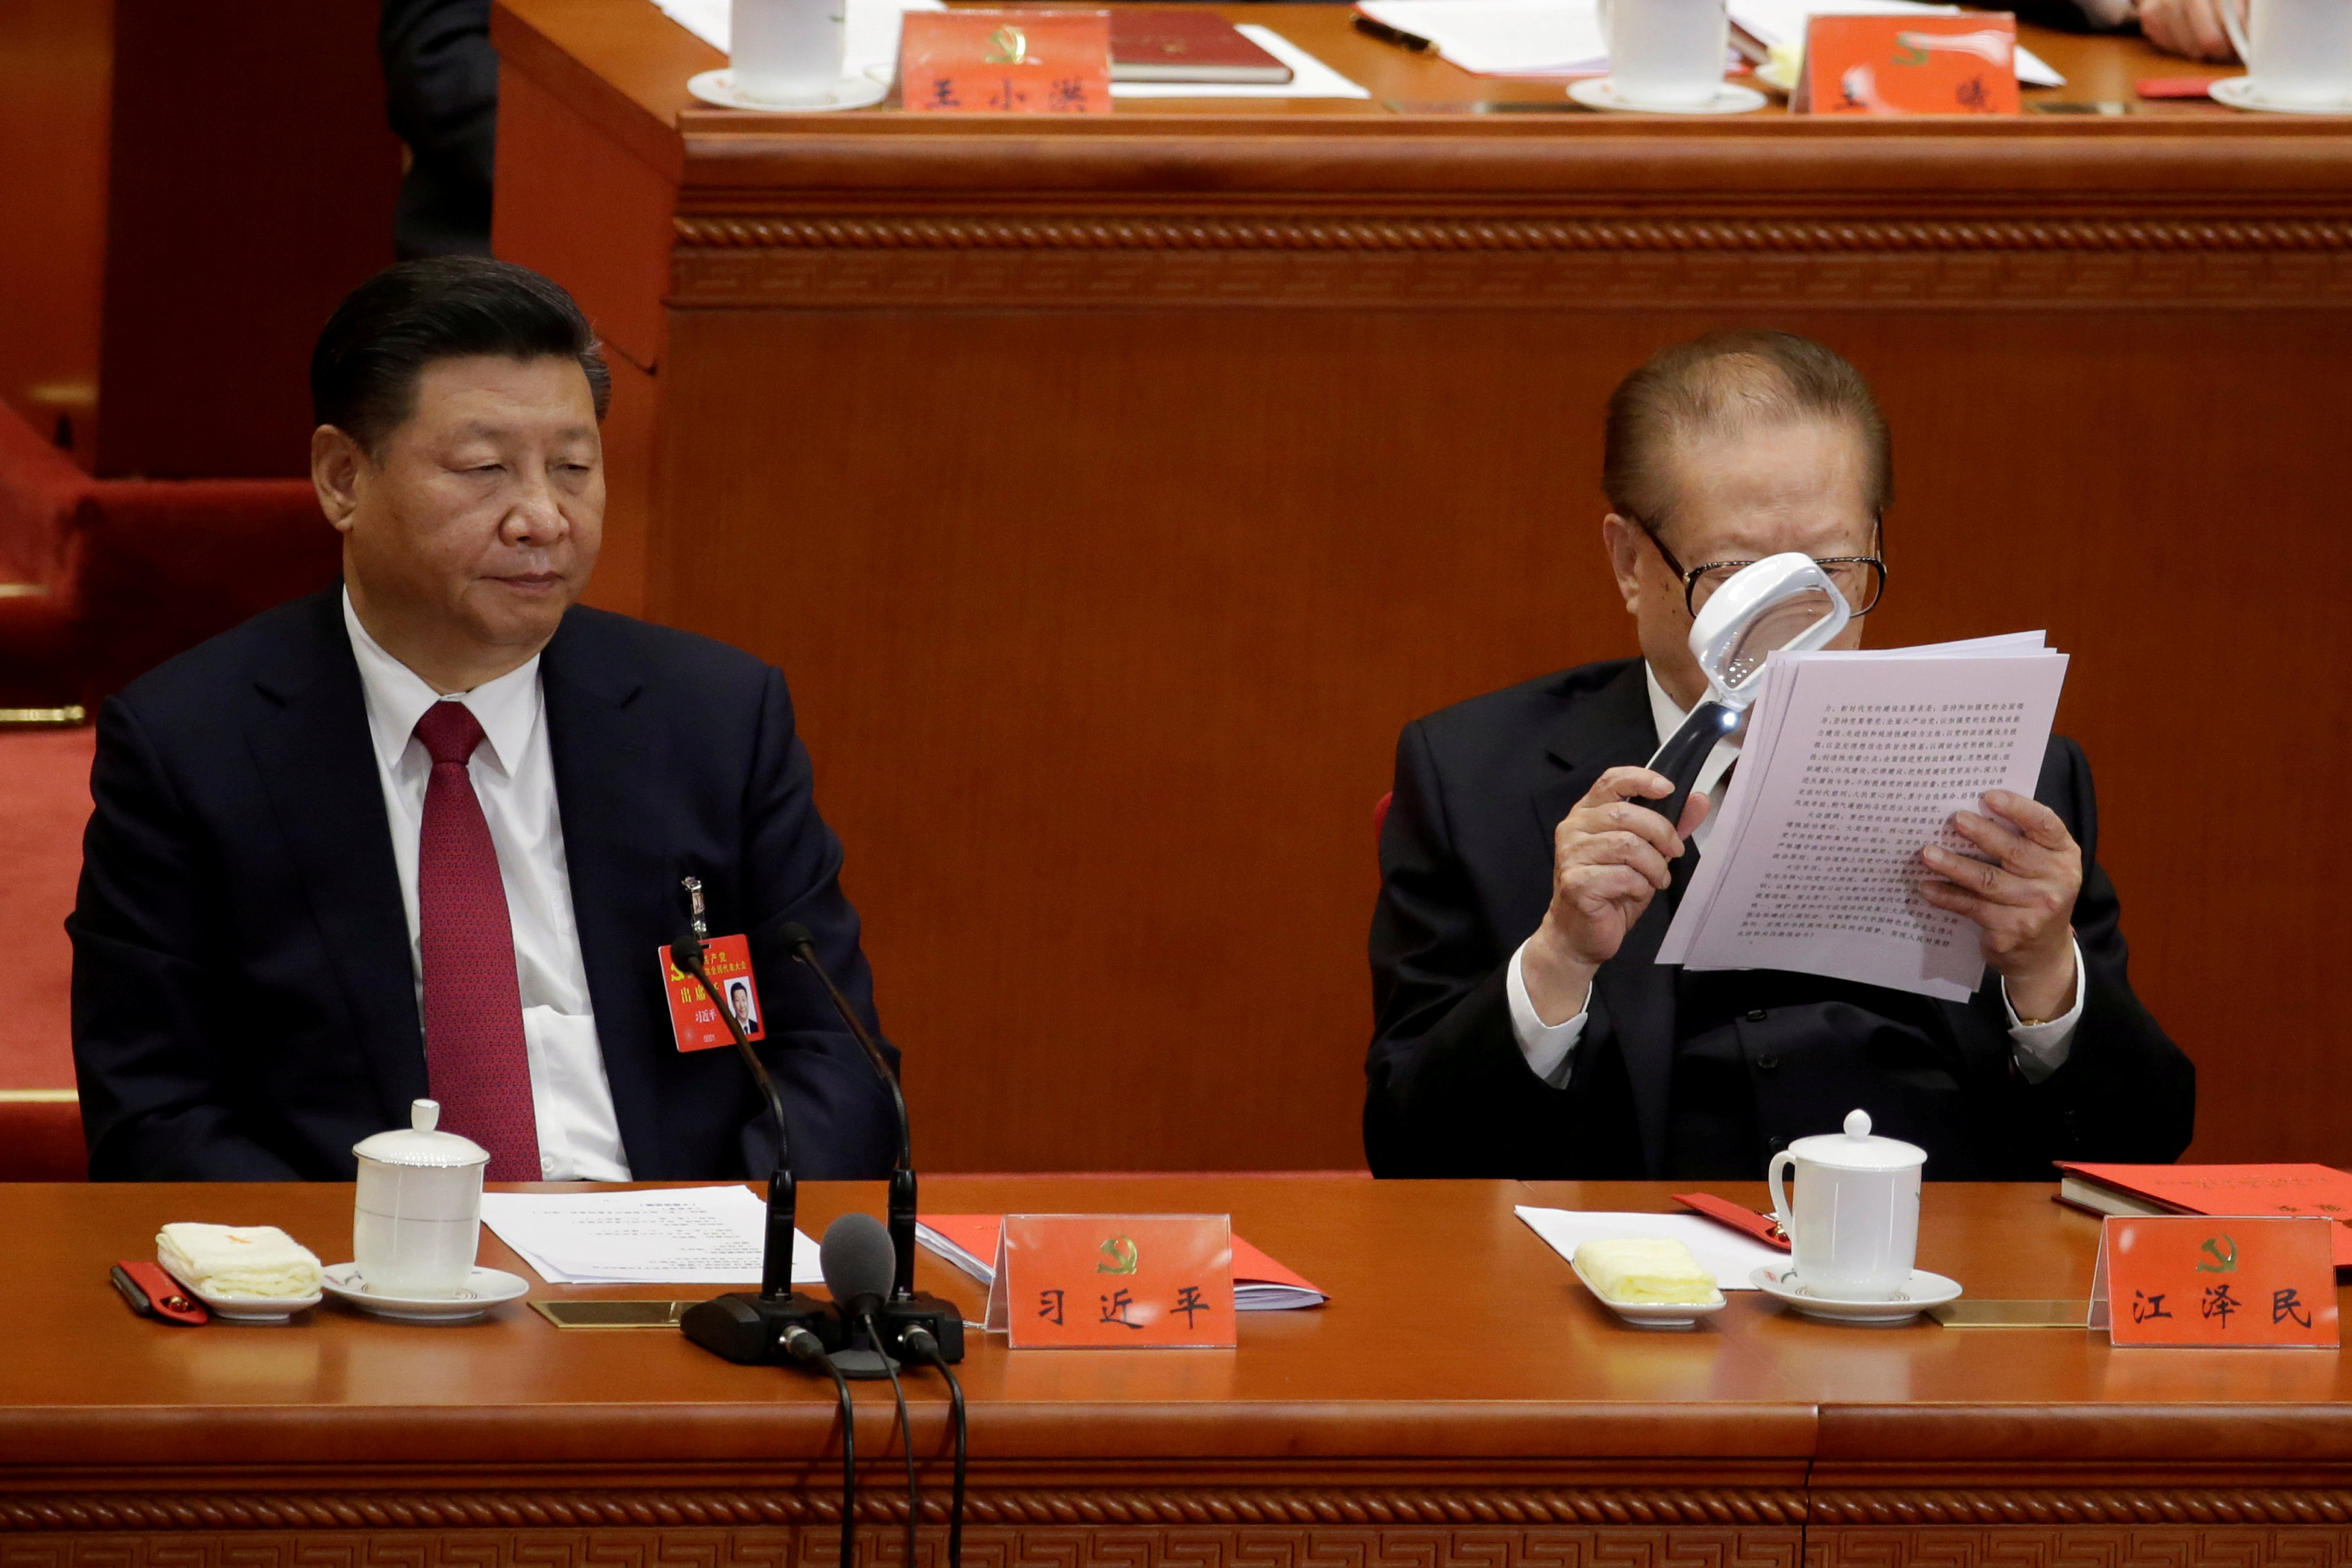 China Communist Party enshrines 'Xi Jinping political thought' in constitution